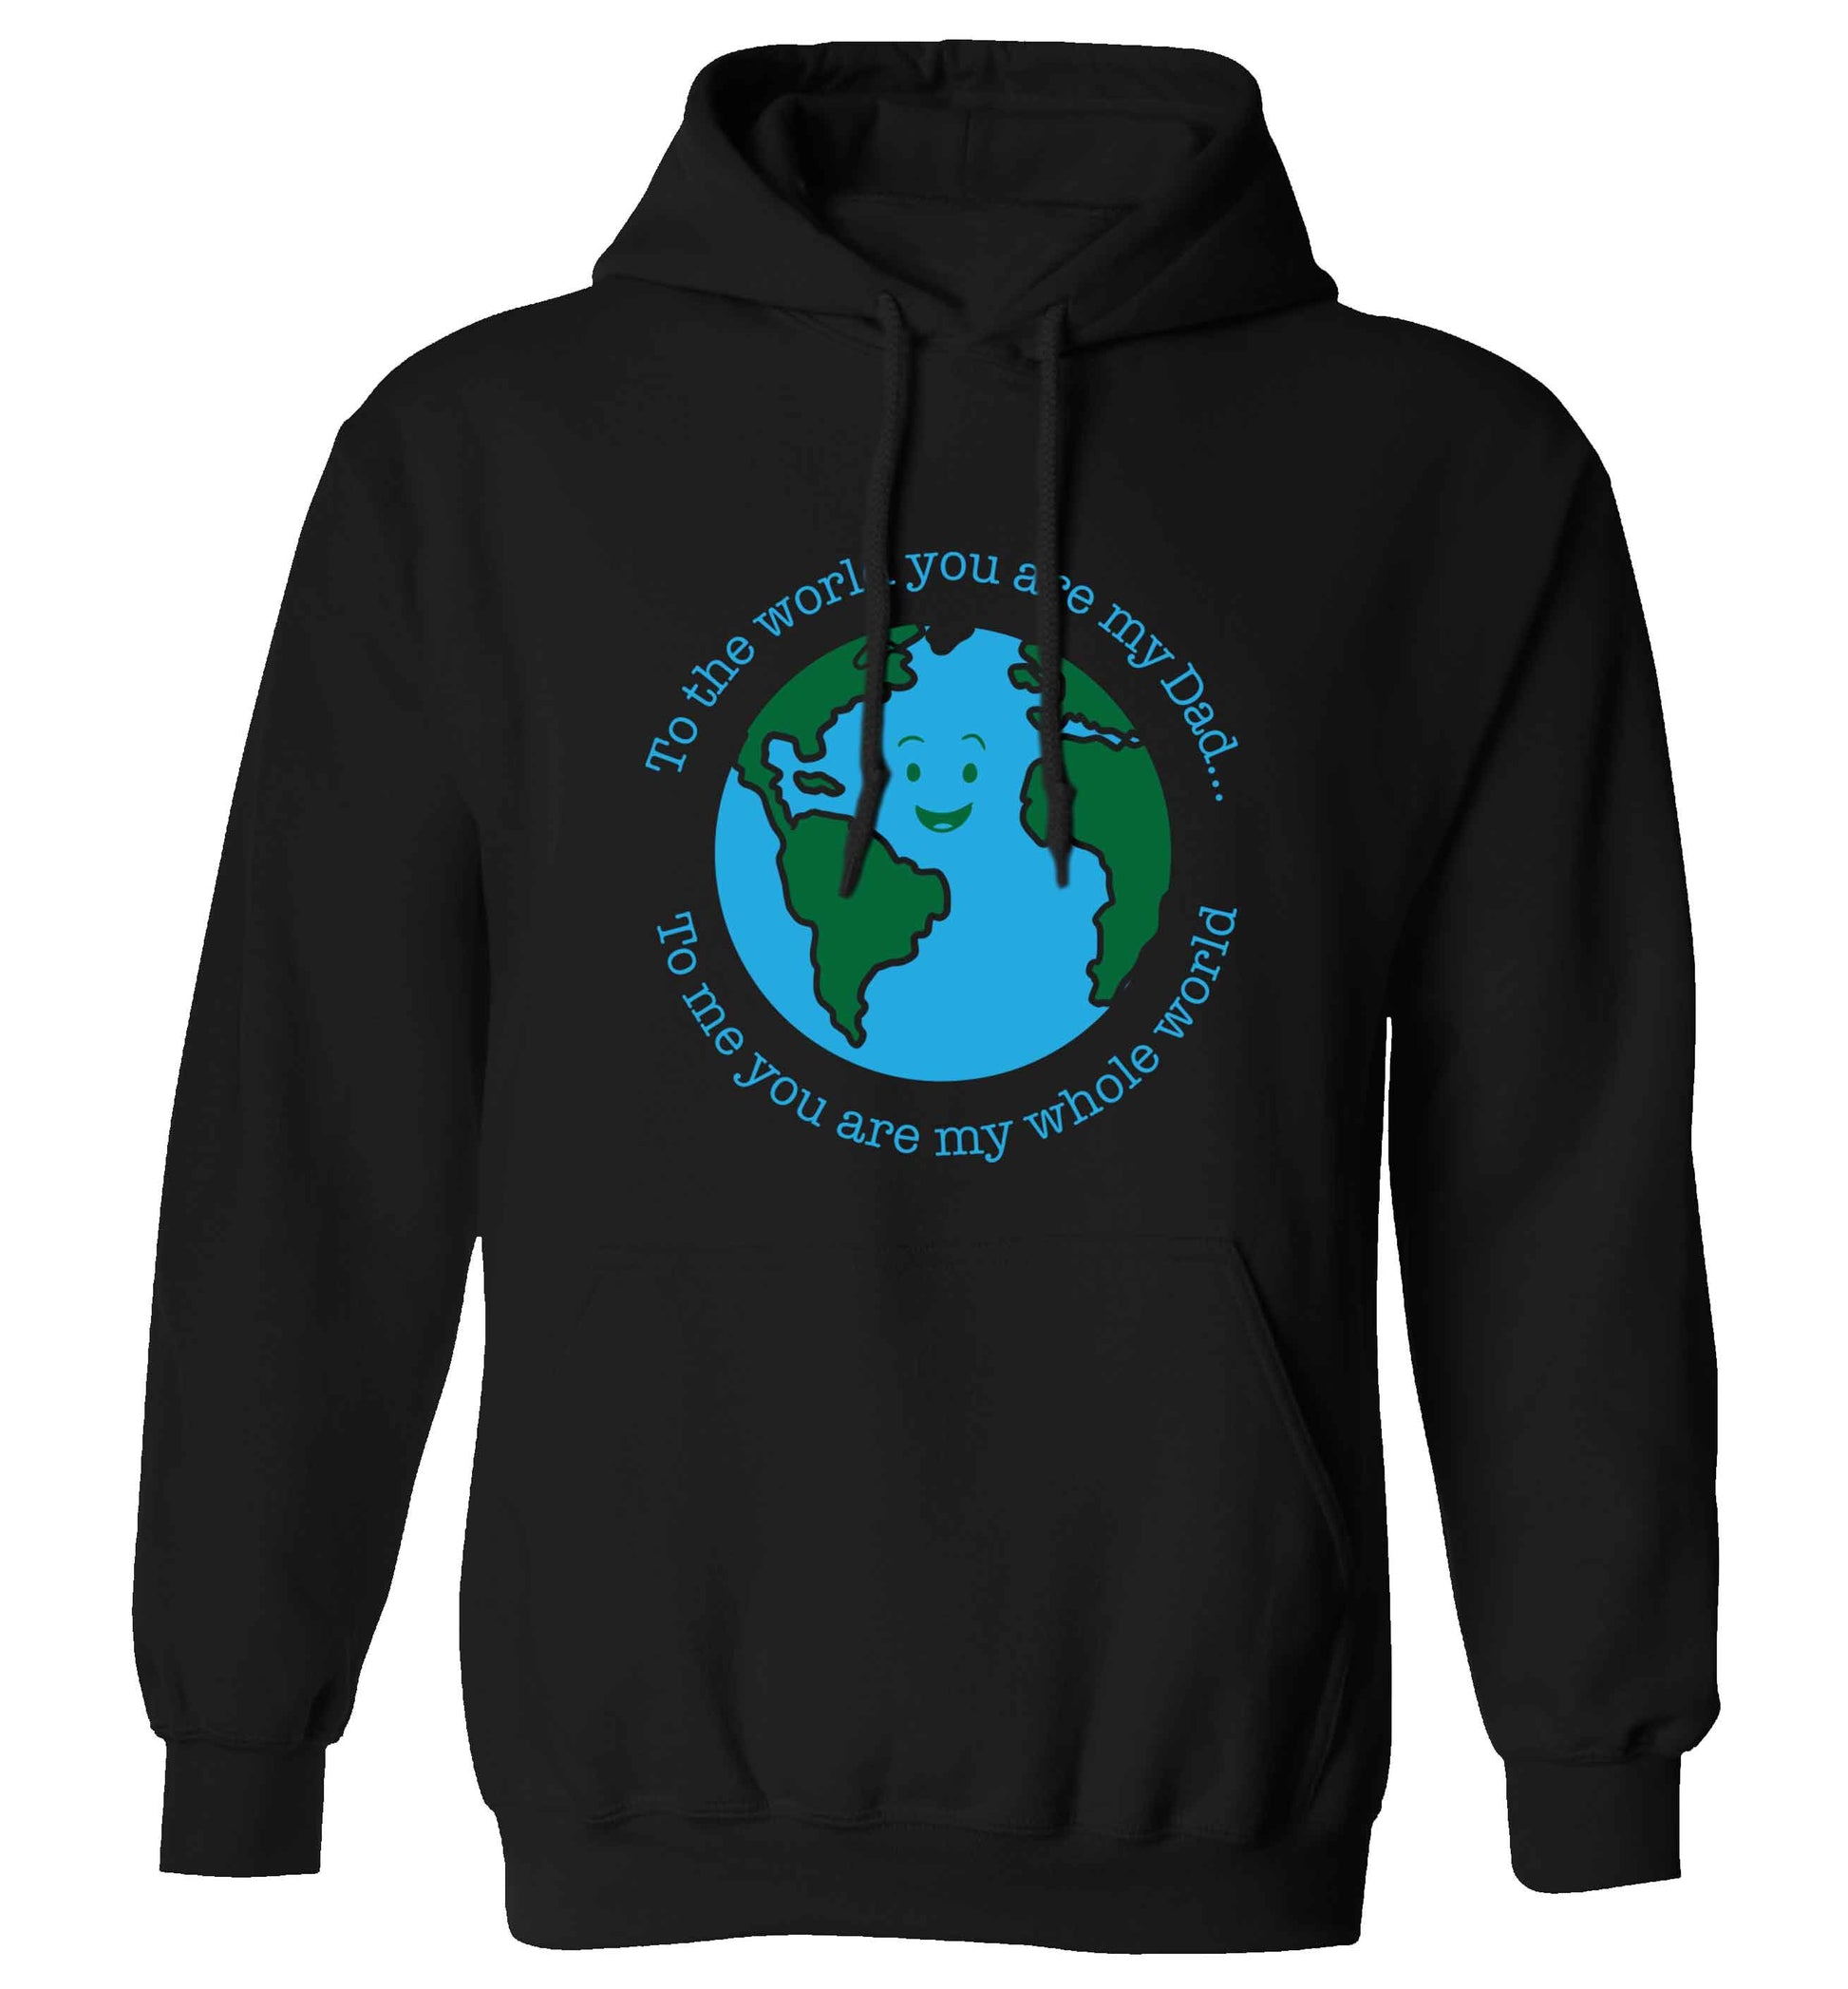 To the world you are my dad, to me you are my whole world adults unisex black hoodie 2XL